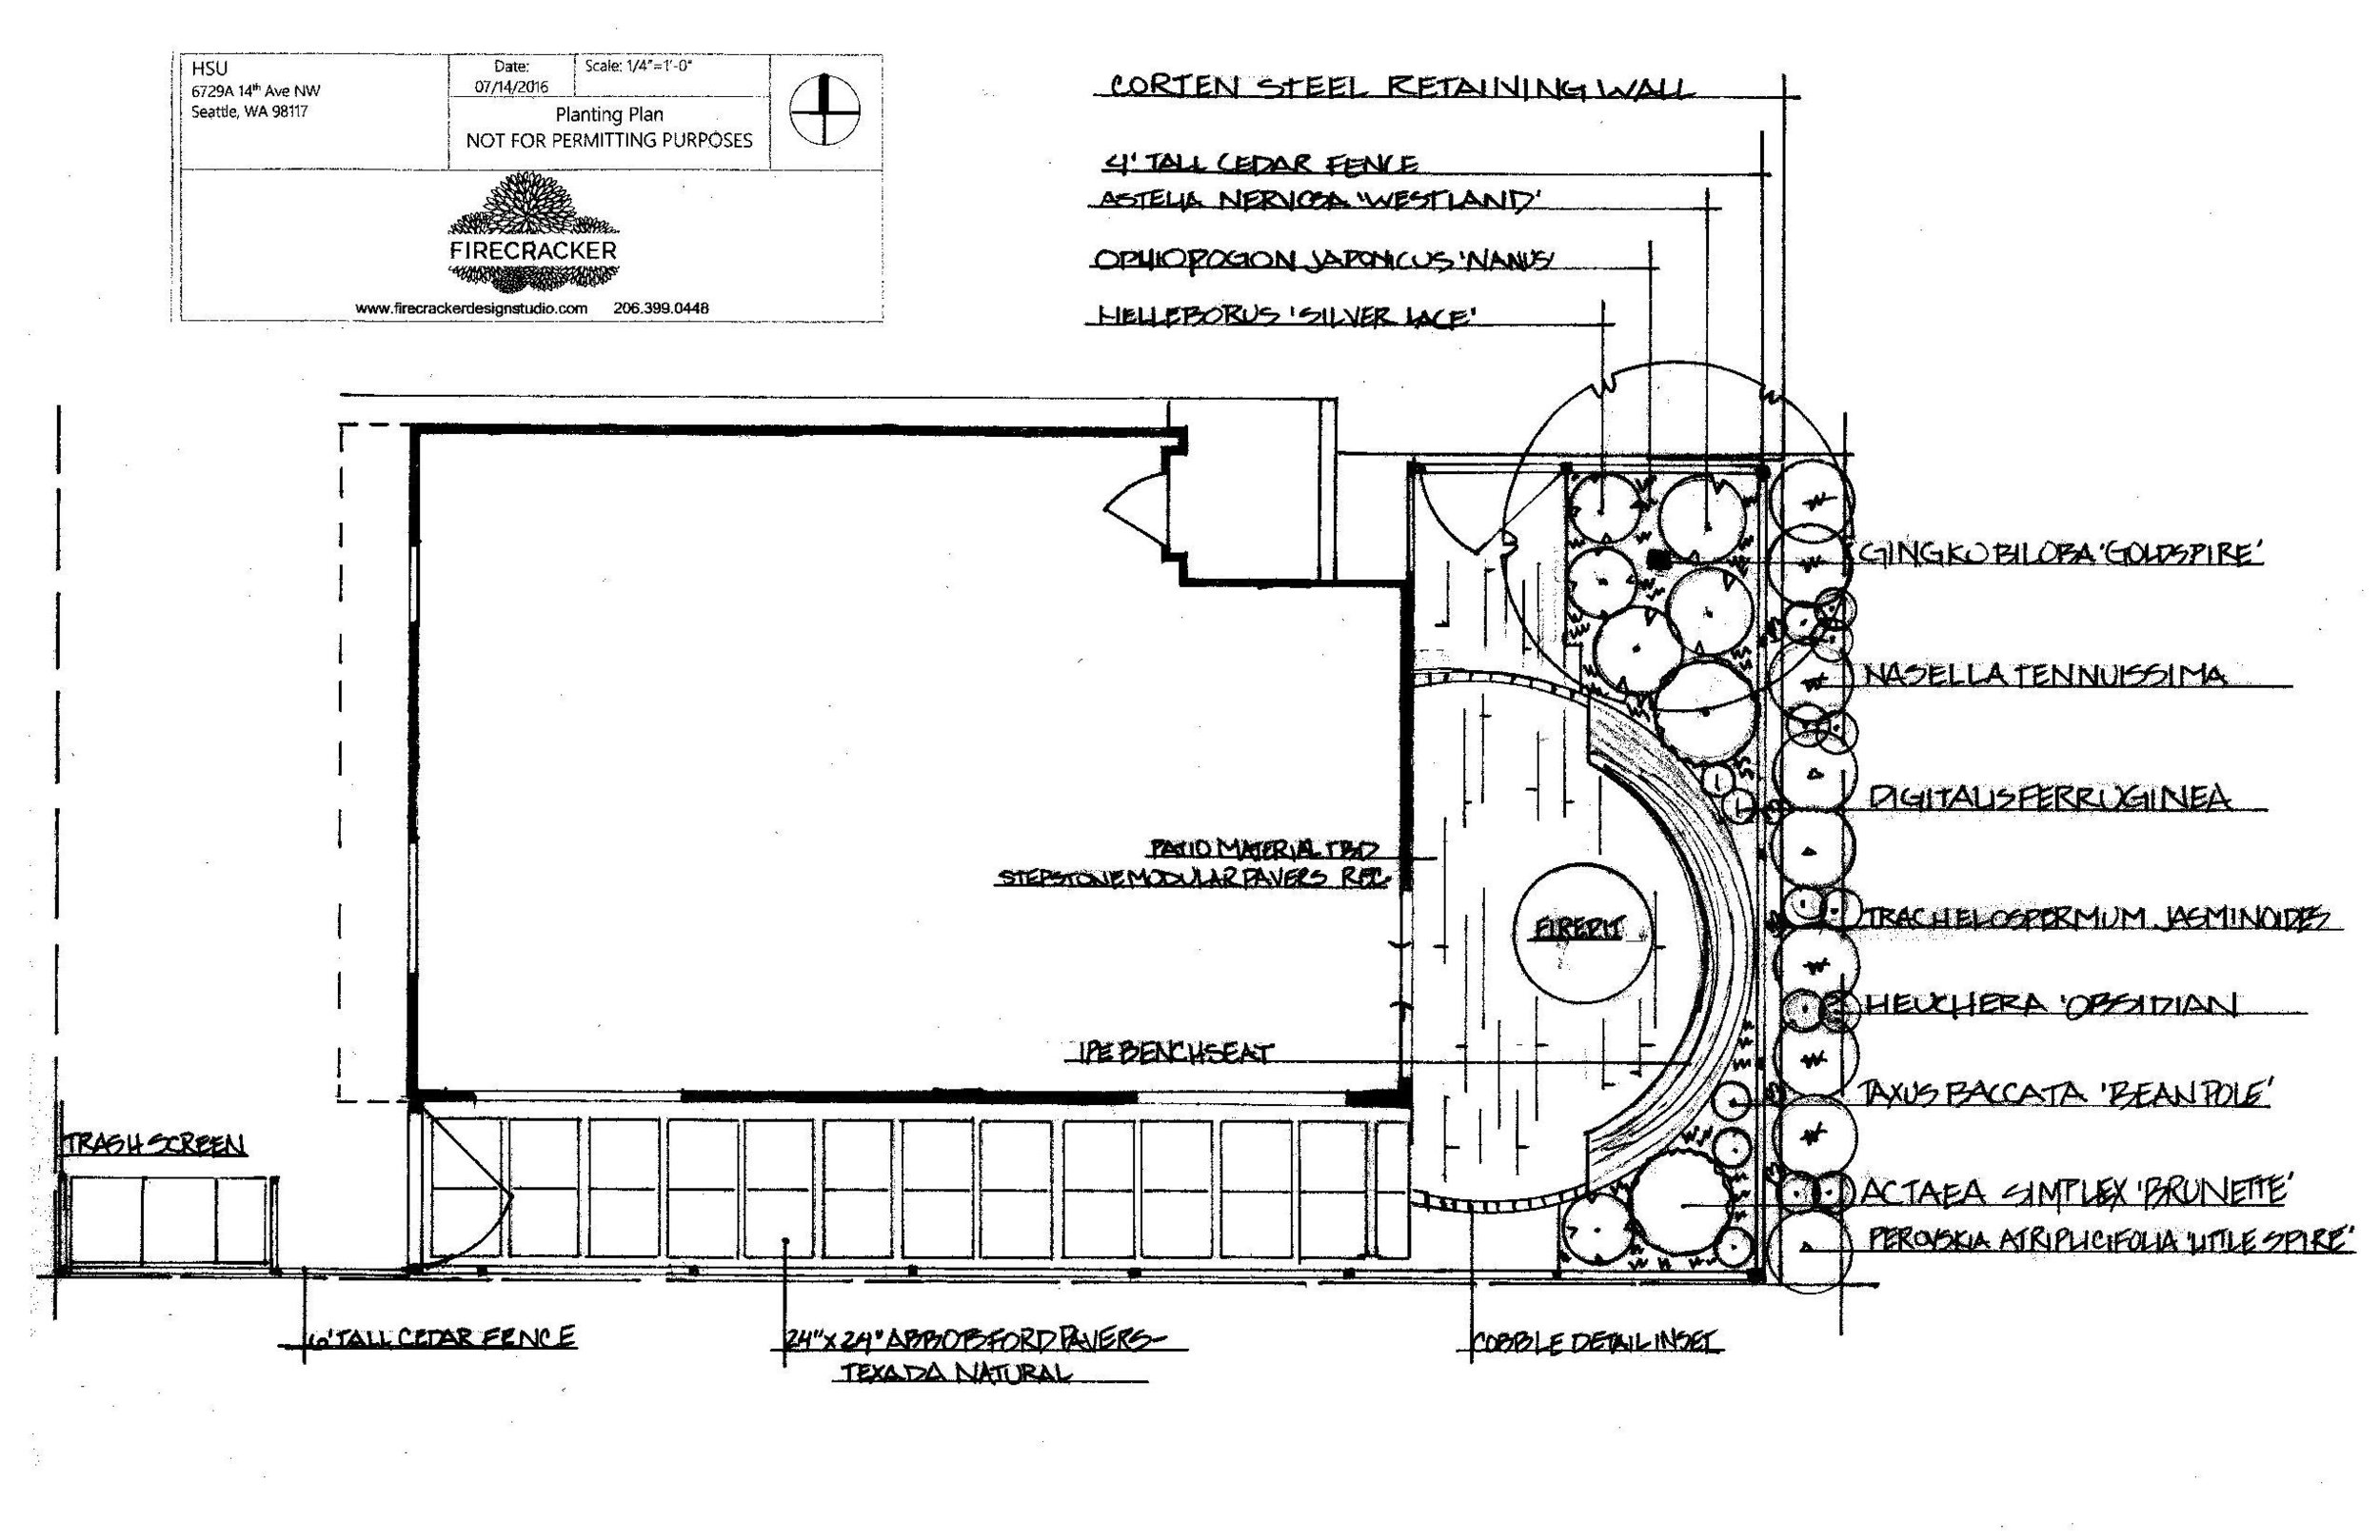 Hsu planting plan concept - NOT FOR PERMITS20160720_16122998-page-001.jpg